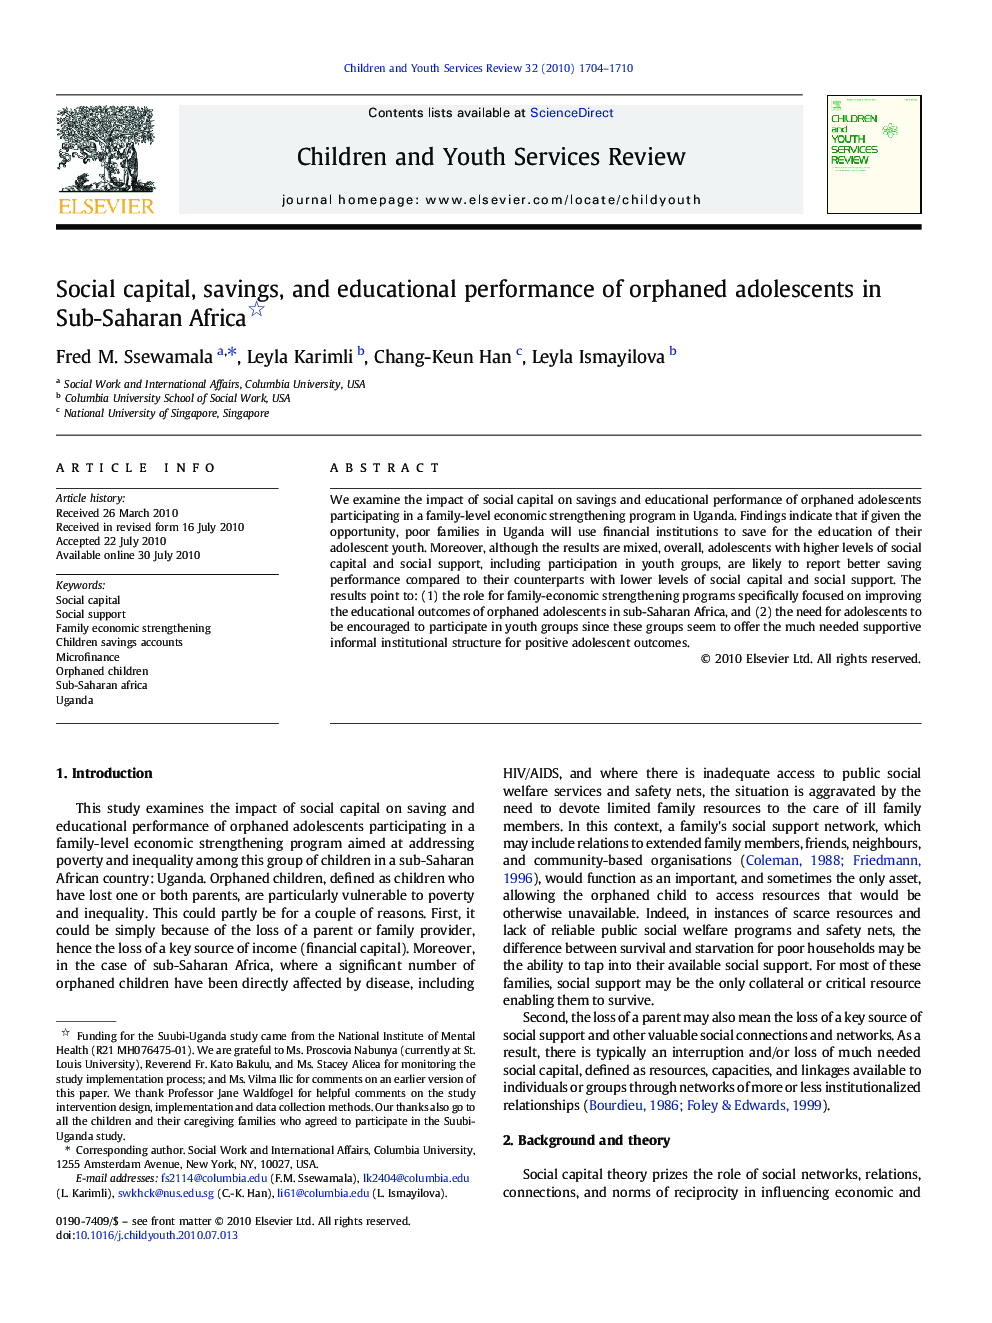 Social capital, savings, and educational performance of orphaned adolescents in Sub-Saharan Africa 